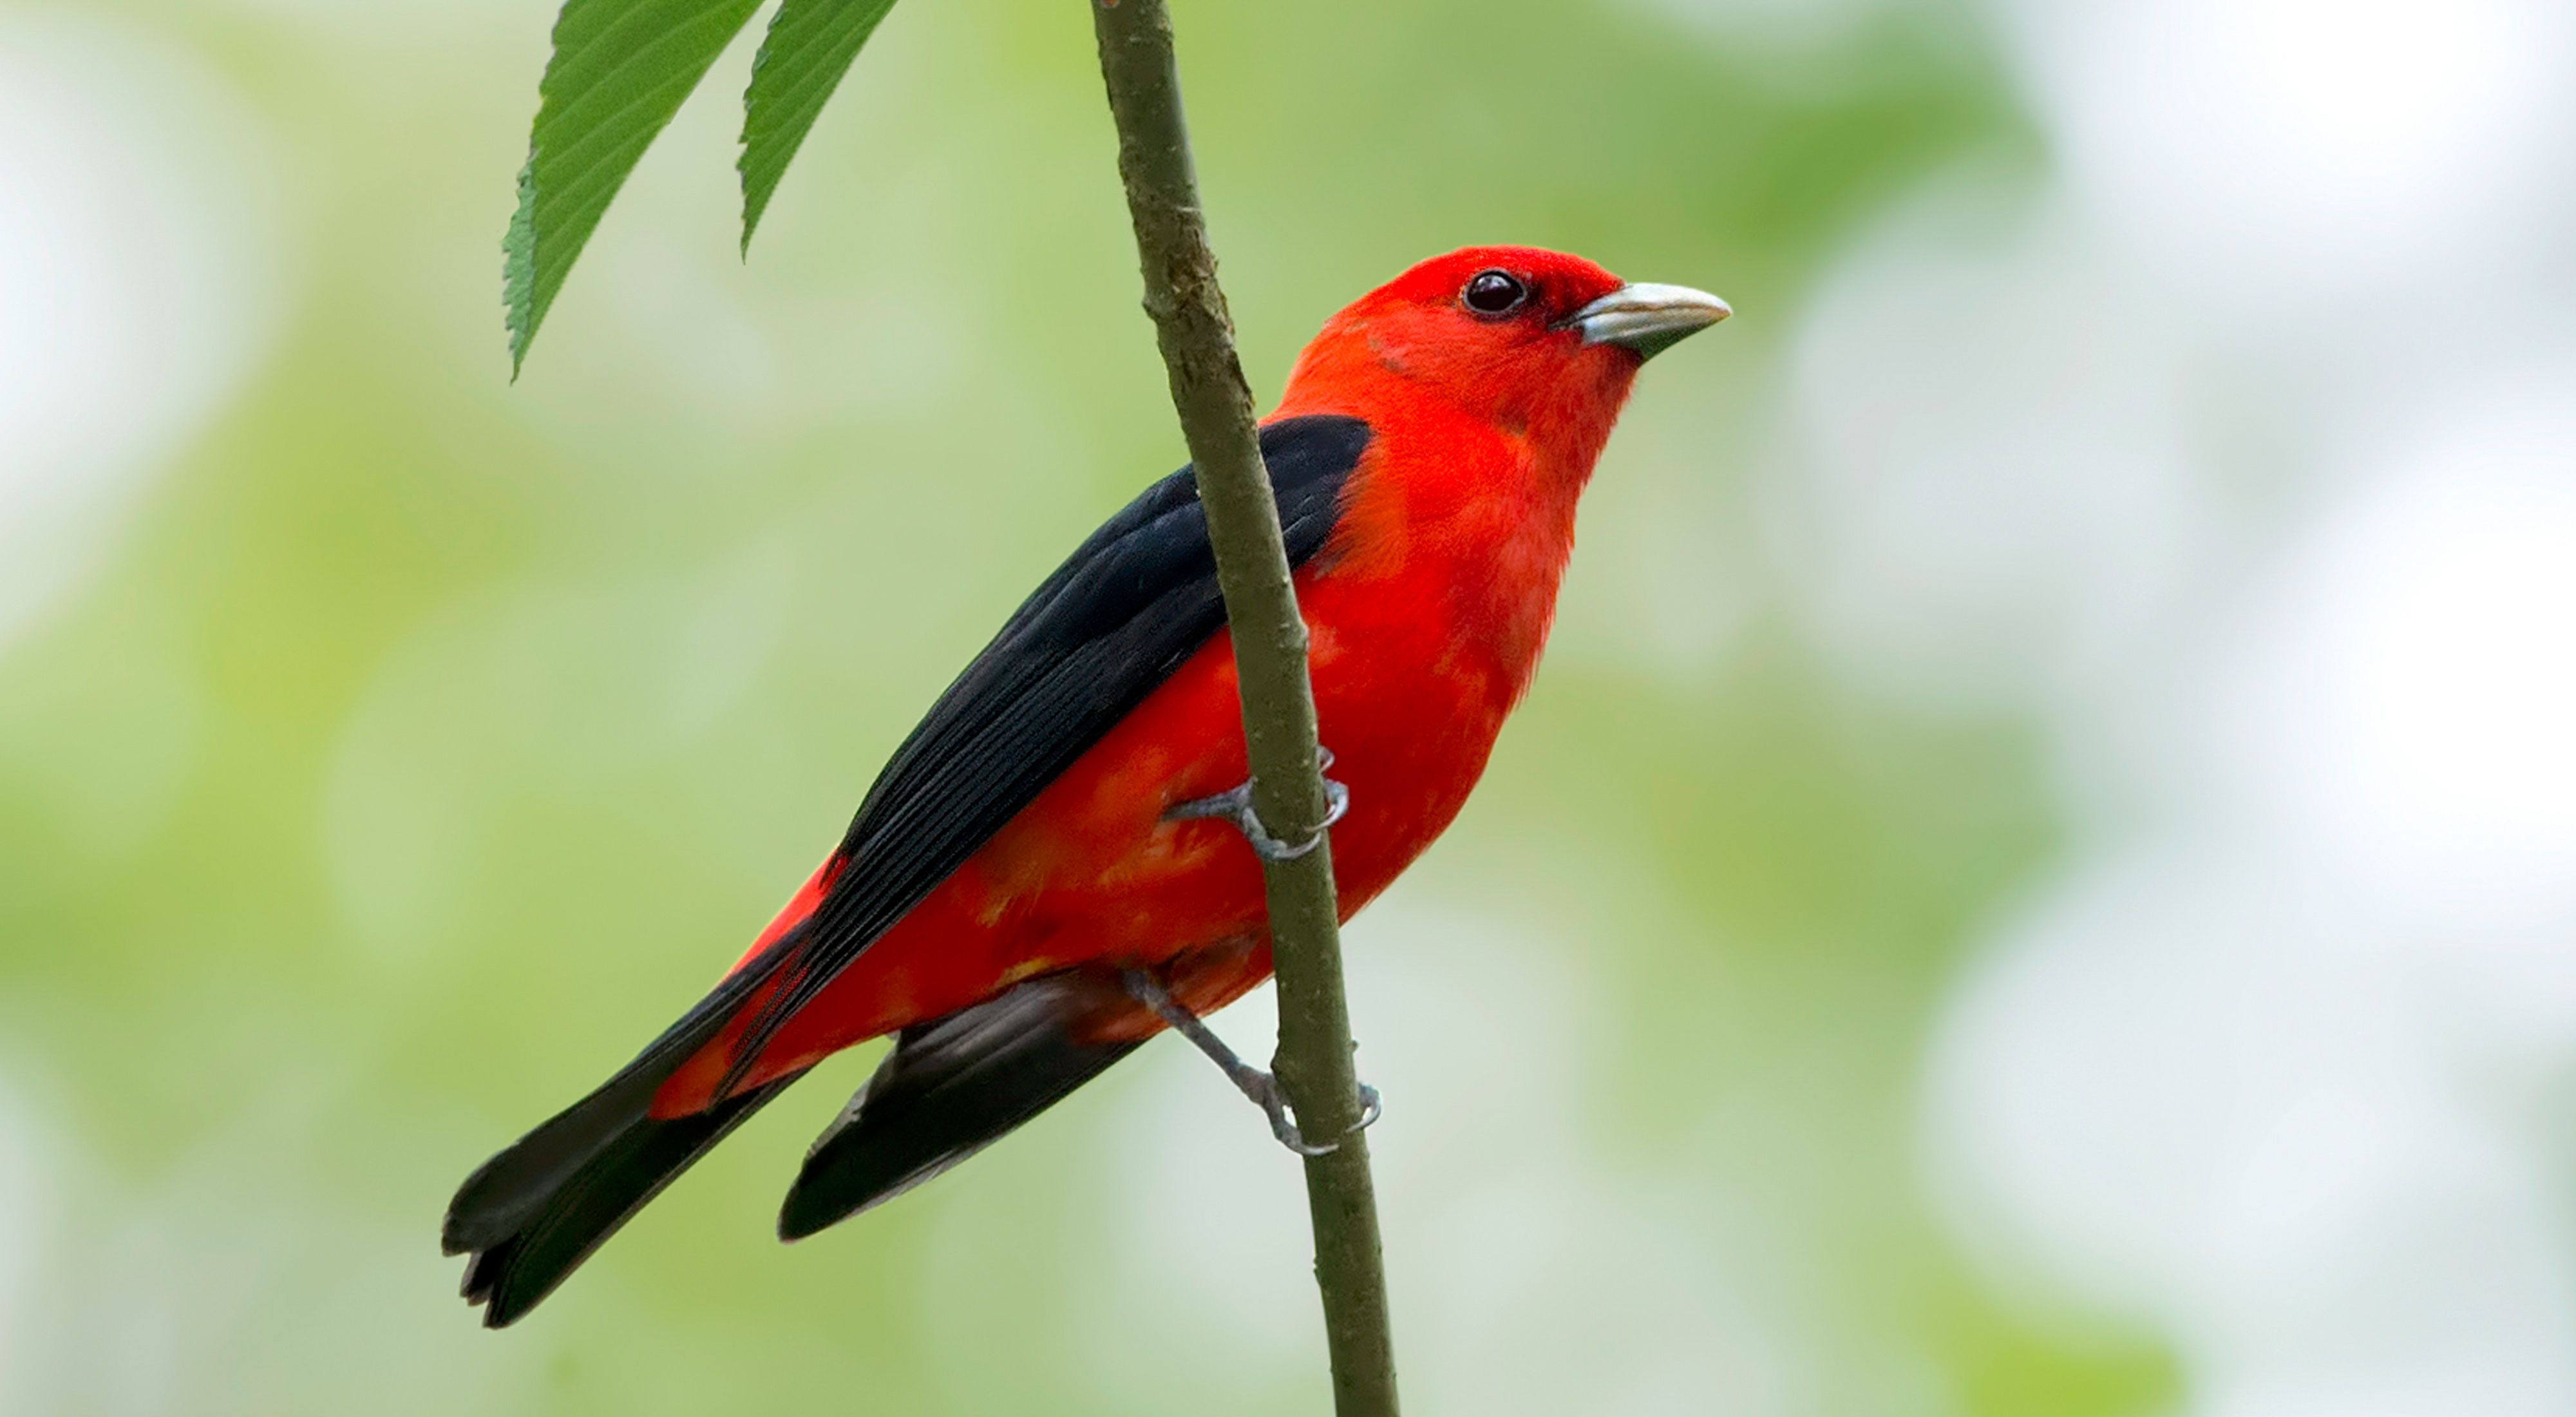 A bright red bird with black wings perches on a thin branch.